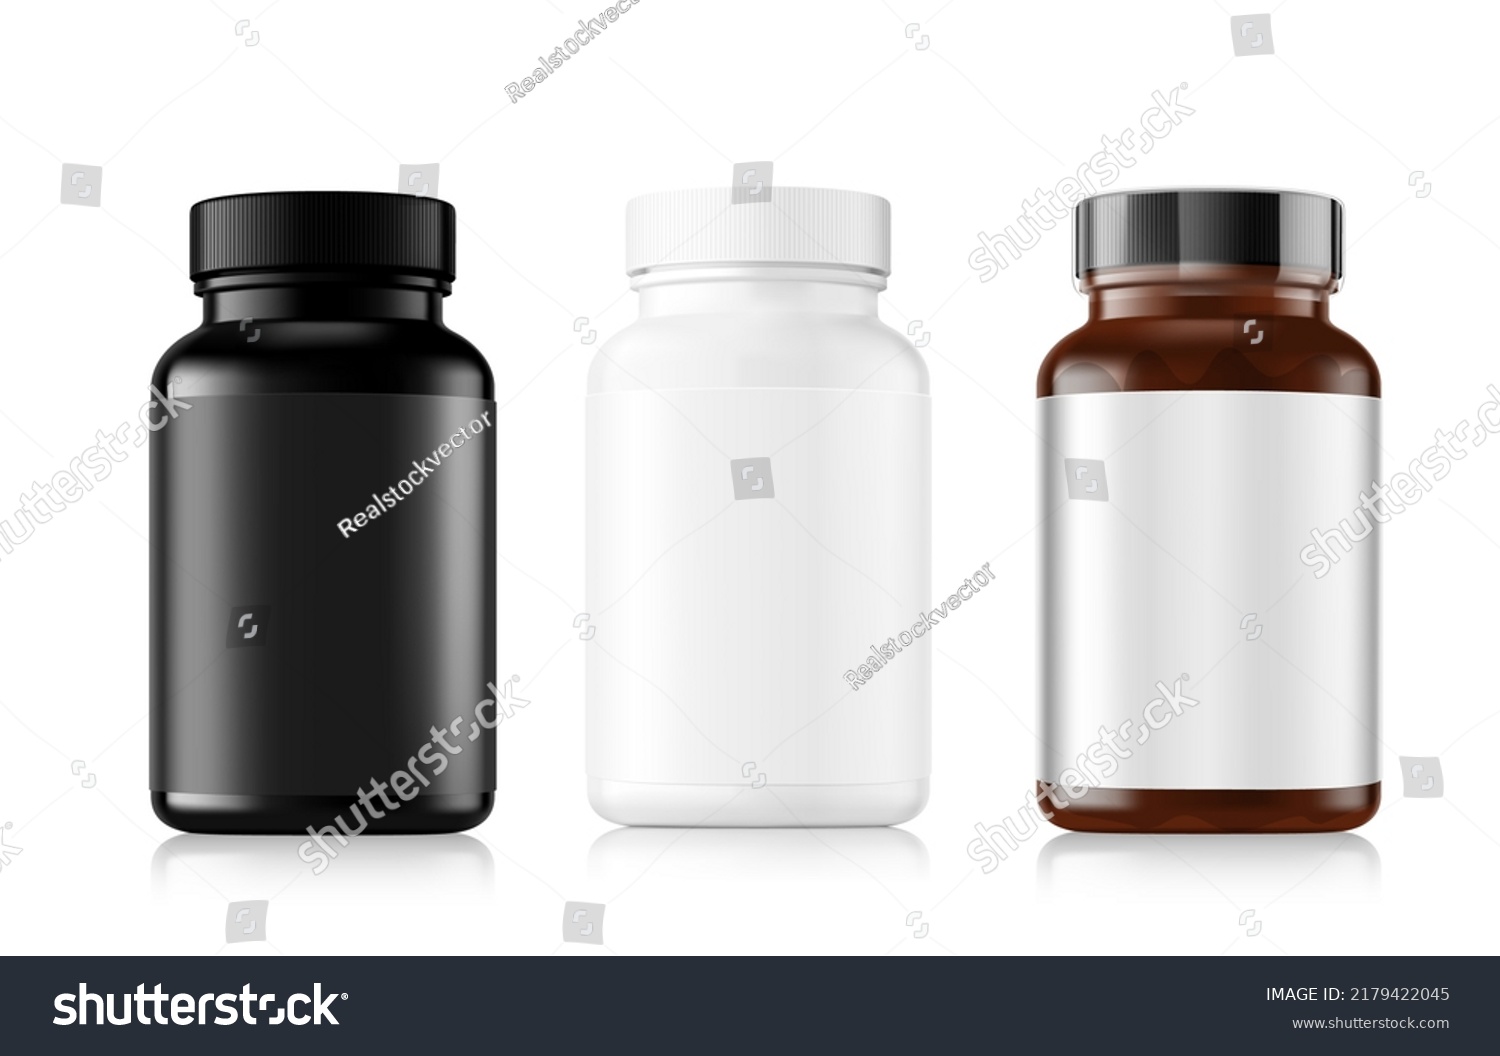 SVG of Black, white and amber bottles mockup isolated on white background. Can be used for medical, cosmetic, food. Vector illustration. EPS10.	 svg